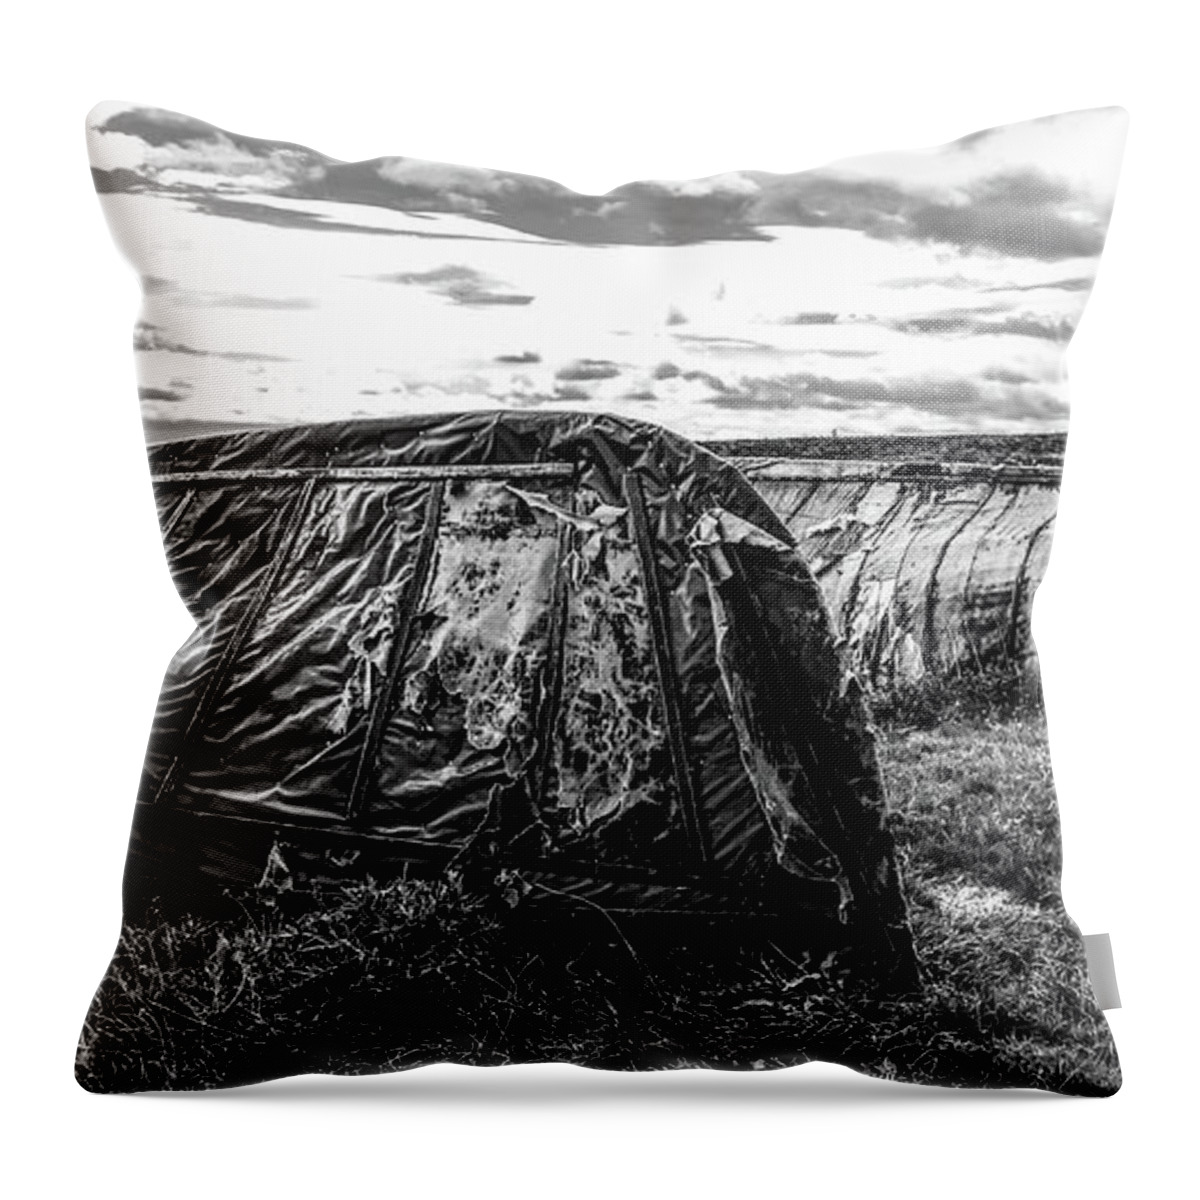 Holy Island Throw Pillow featuring the photograph Old Tarred Boat On Holy Island 2 by Lexa Harpell